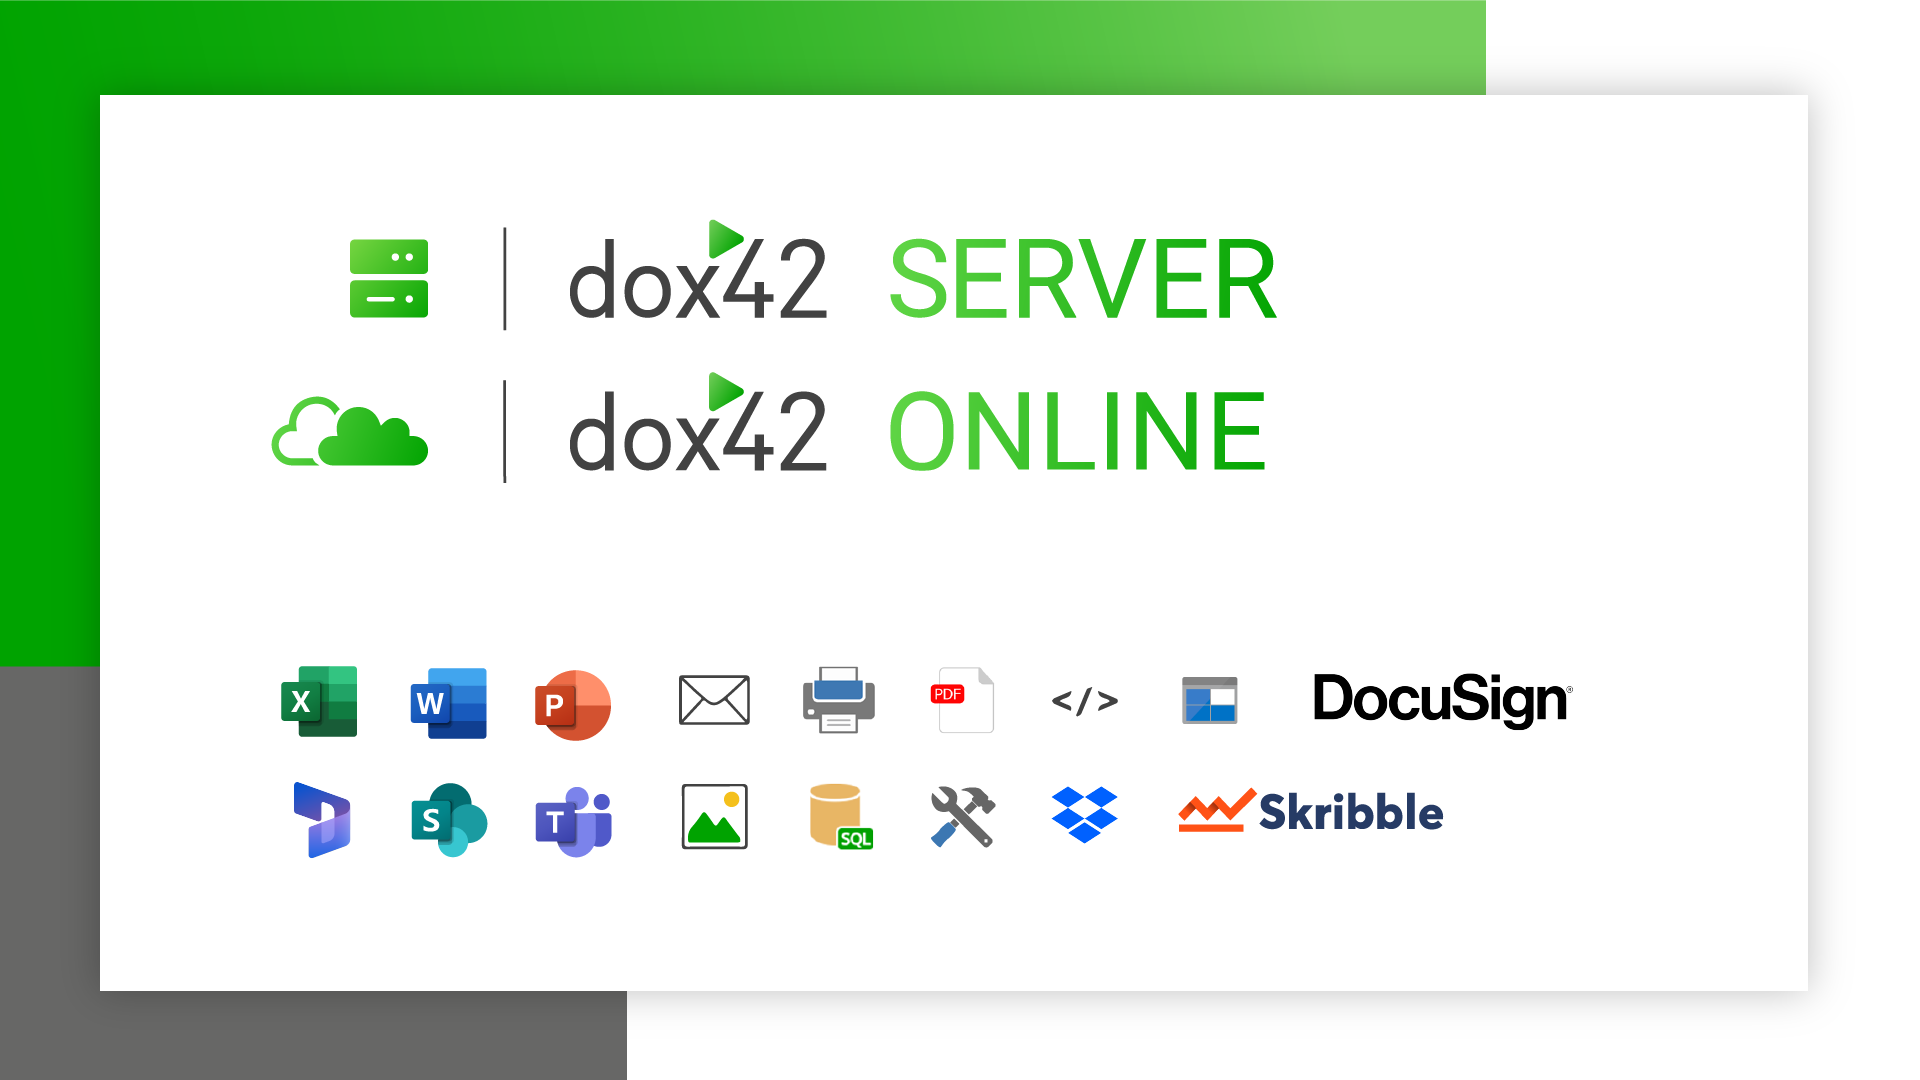 All dox42 Server functions in the cloud